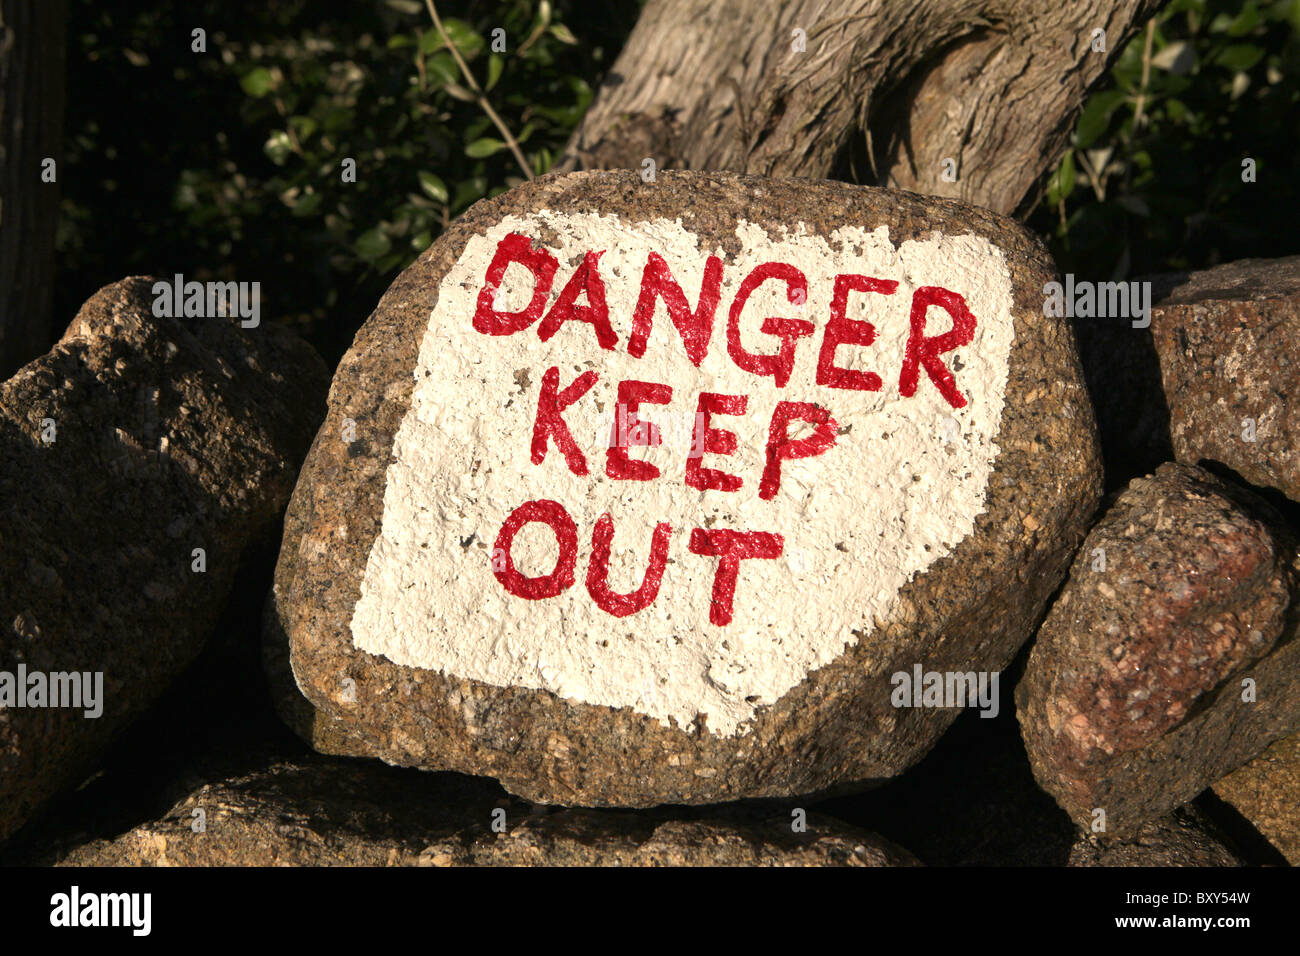 A stone painted with Danger Kepp out in Nanjulian, Penwith District , Cornwall, England. Stock Photo